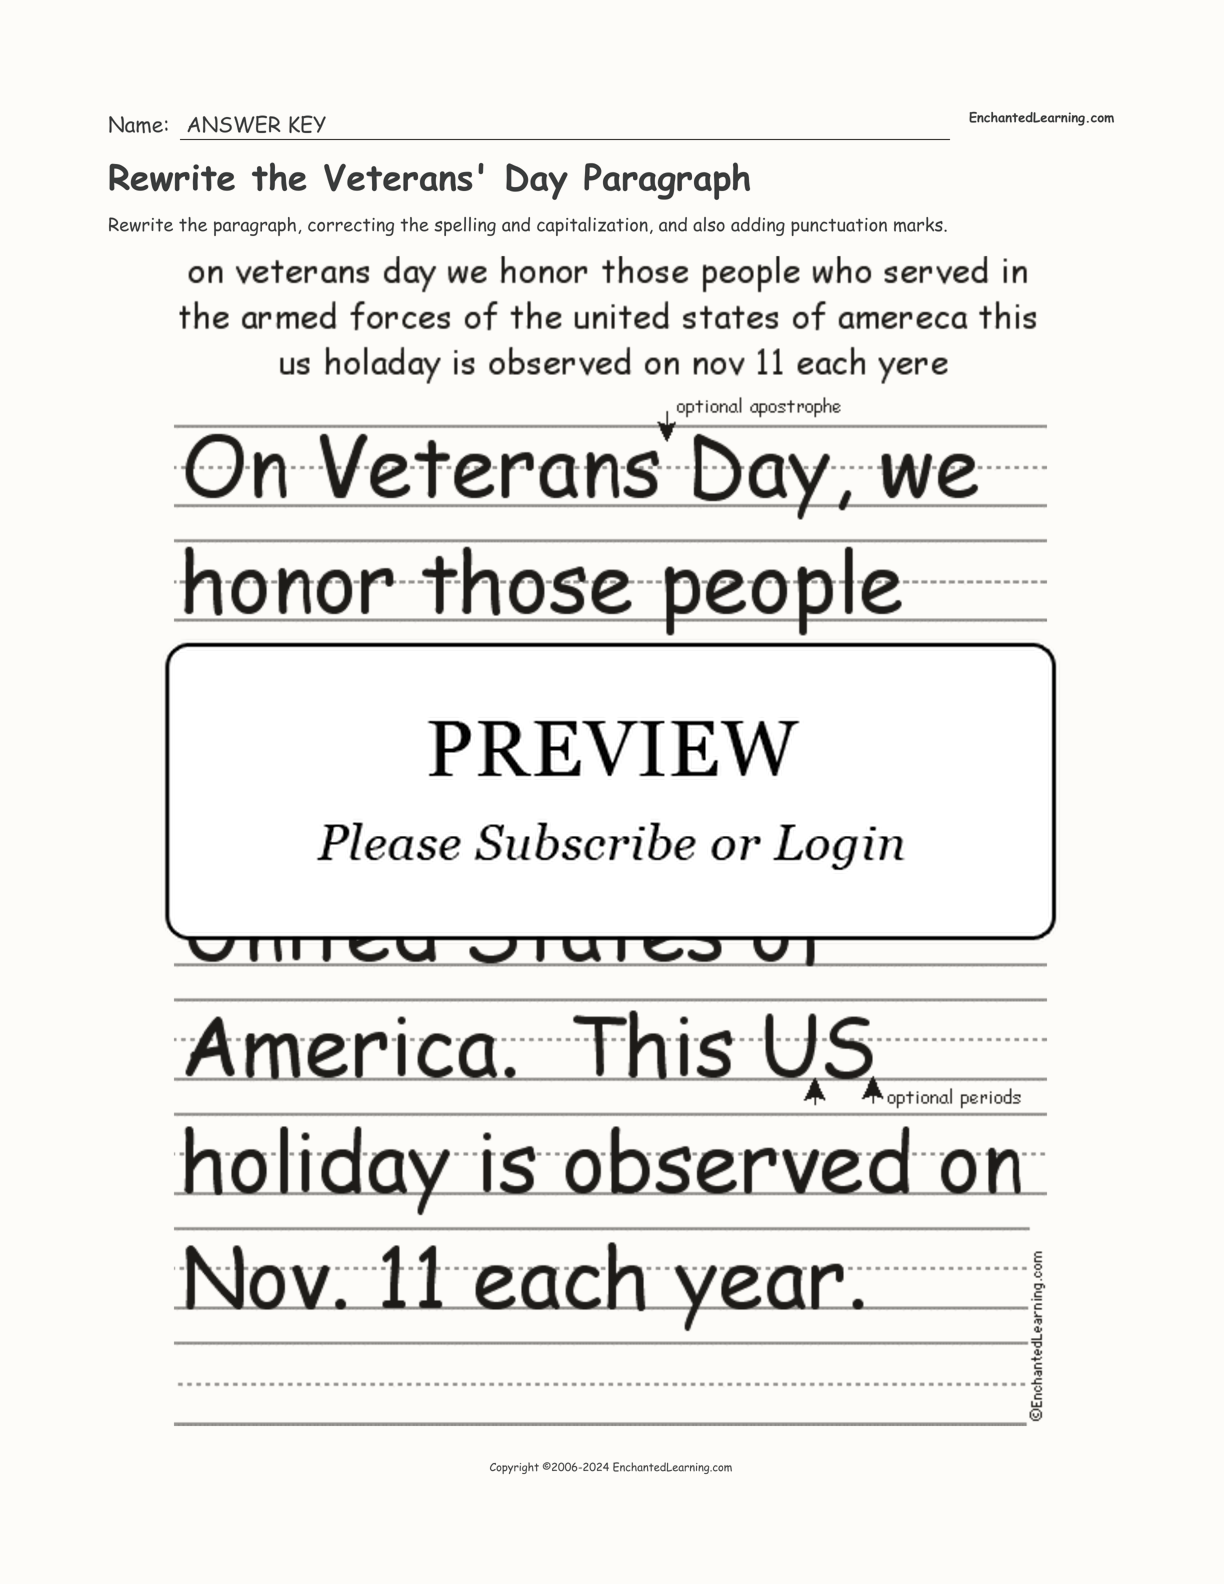 Rewrite the Veterans' Day Paragraph interactive worksheet page 2